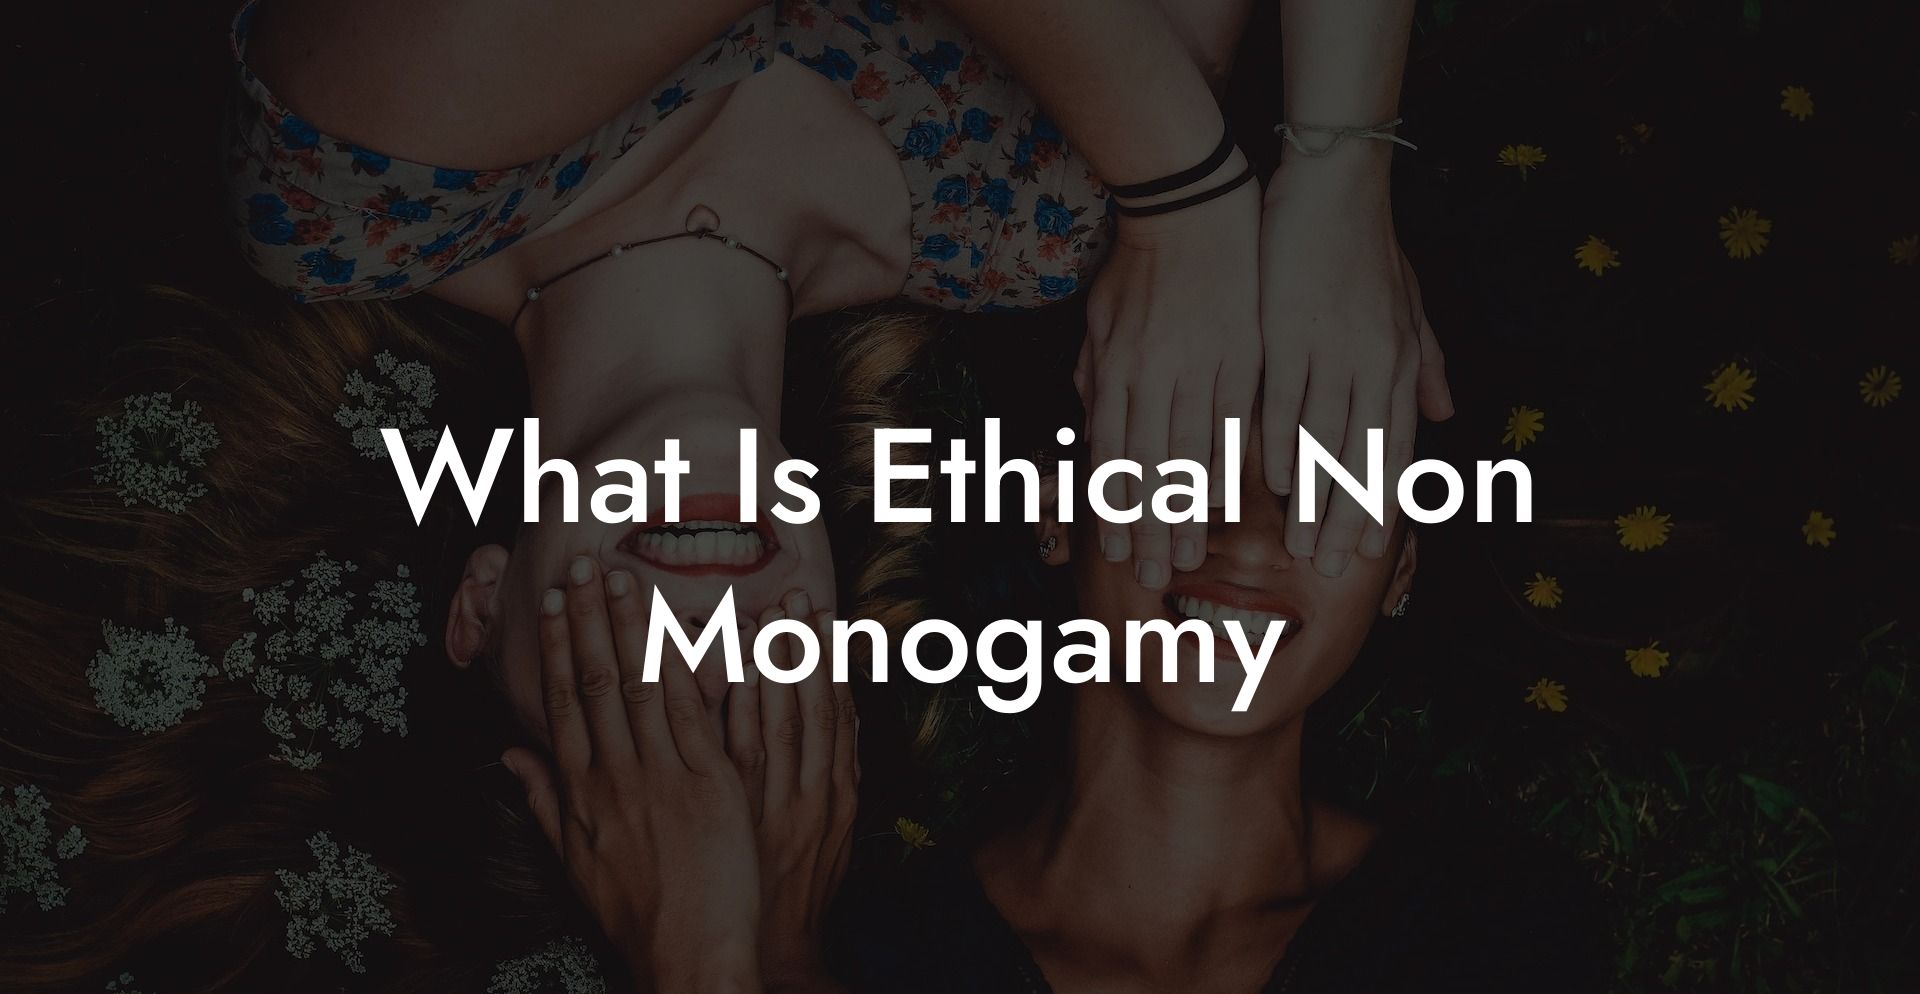 What Is Ethical Non Monogamy?